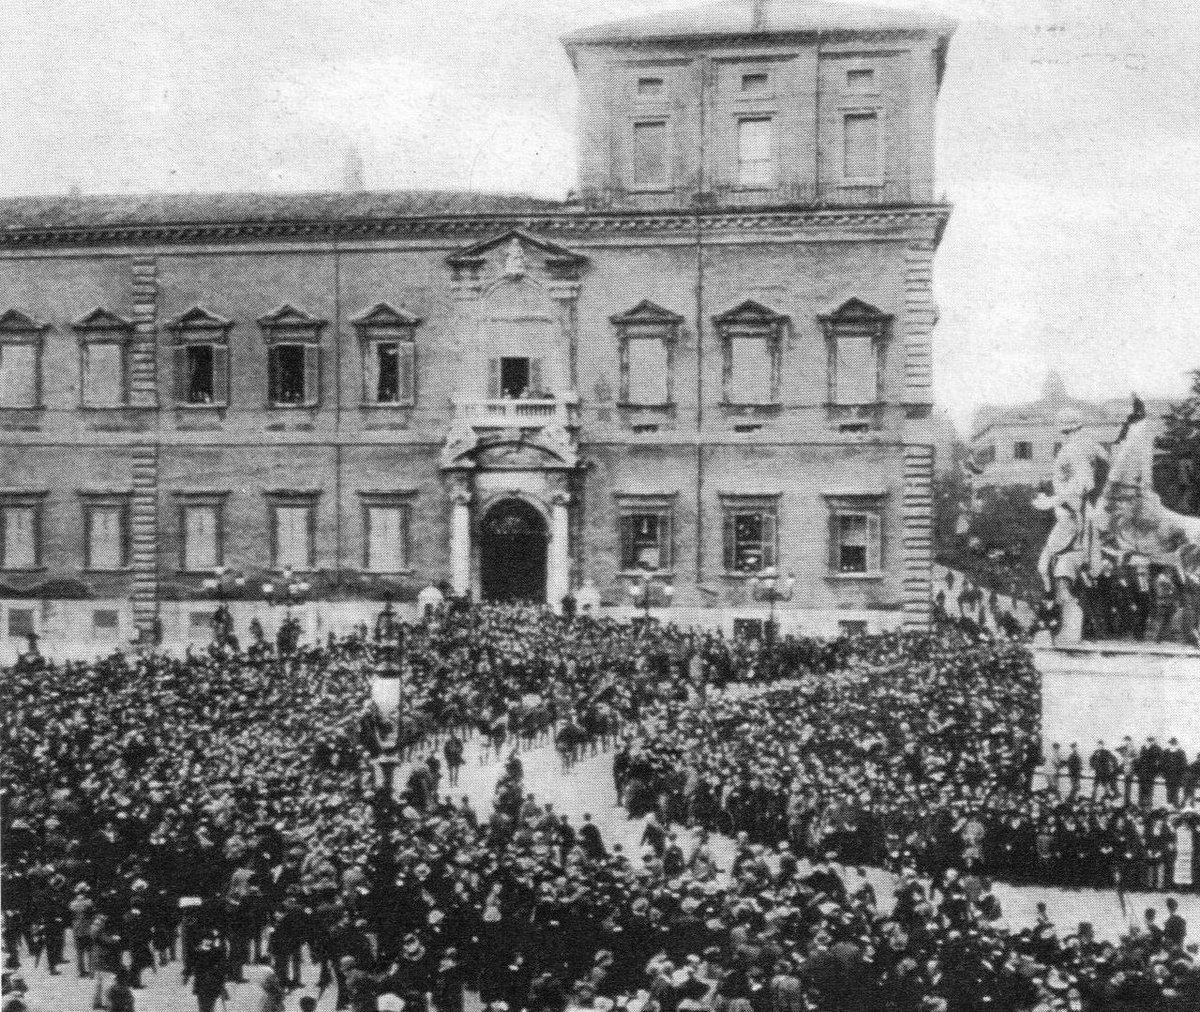 It is 4th anniversary of Mussolini's appointment as President of the Council of Ministers (official title of Italian PM), after forcing the King's hand by staging the 'march on Rome', when 50k armed blackshirts marched on the capital demanding the Fascist Party be given power >>2